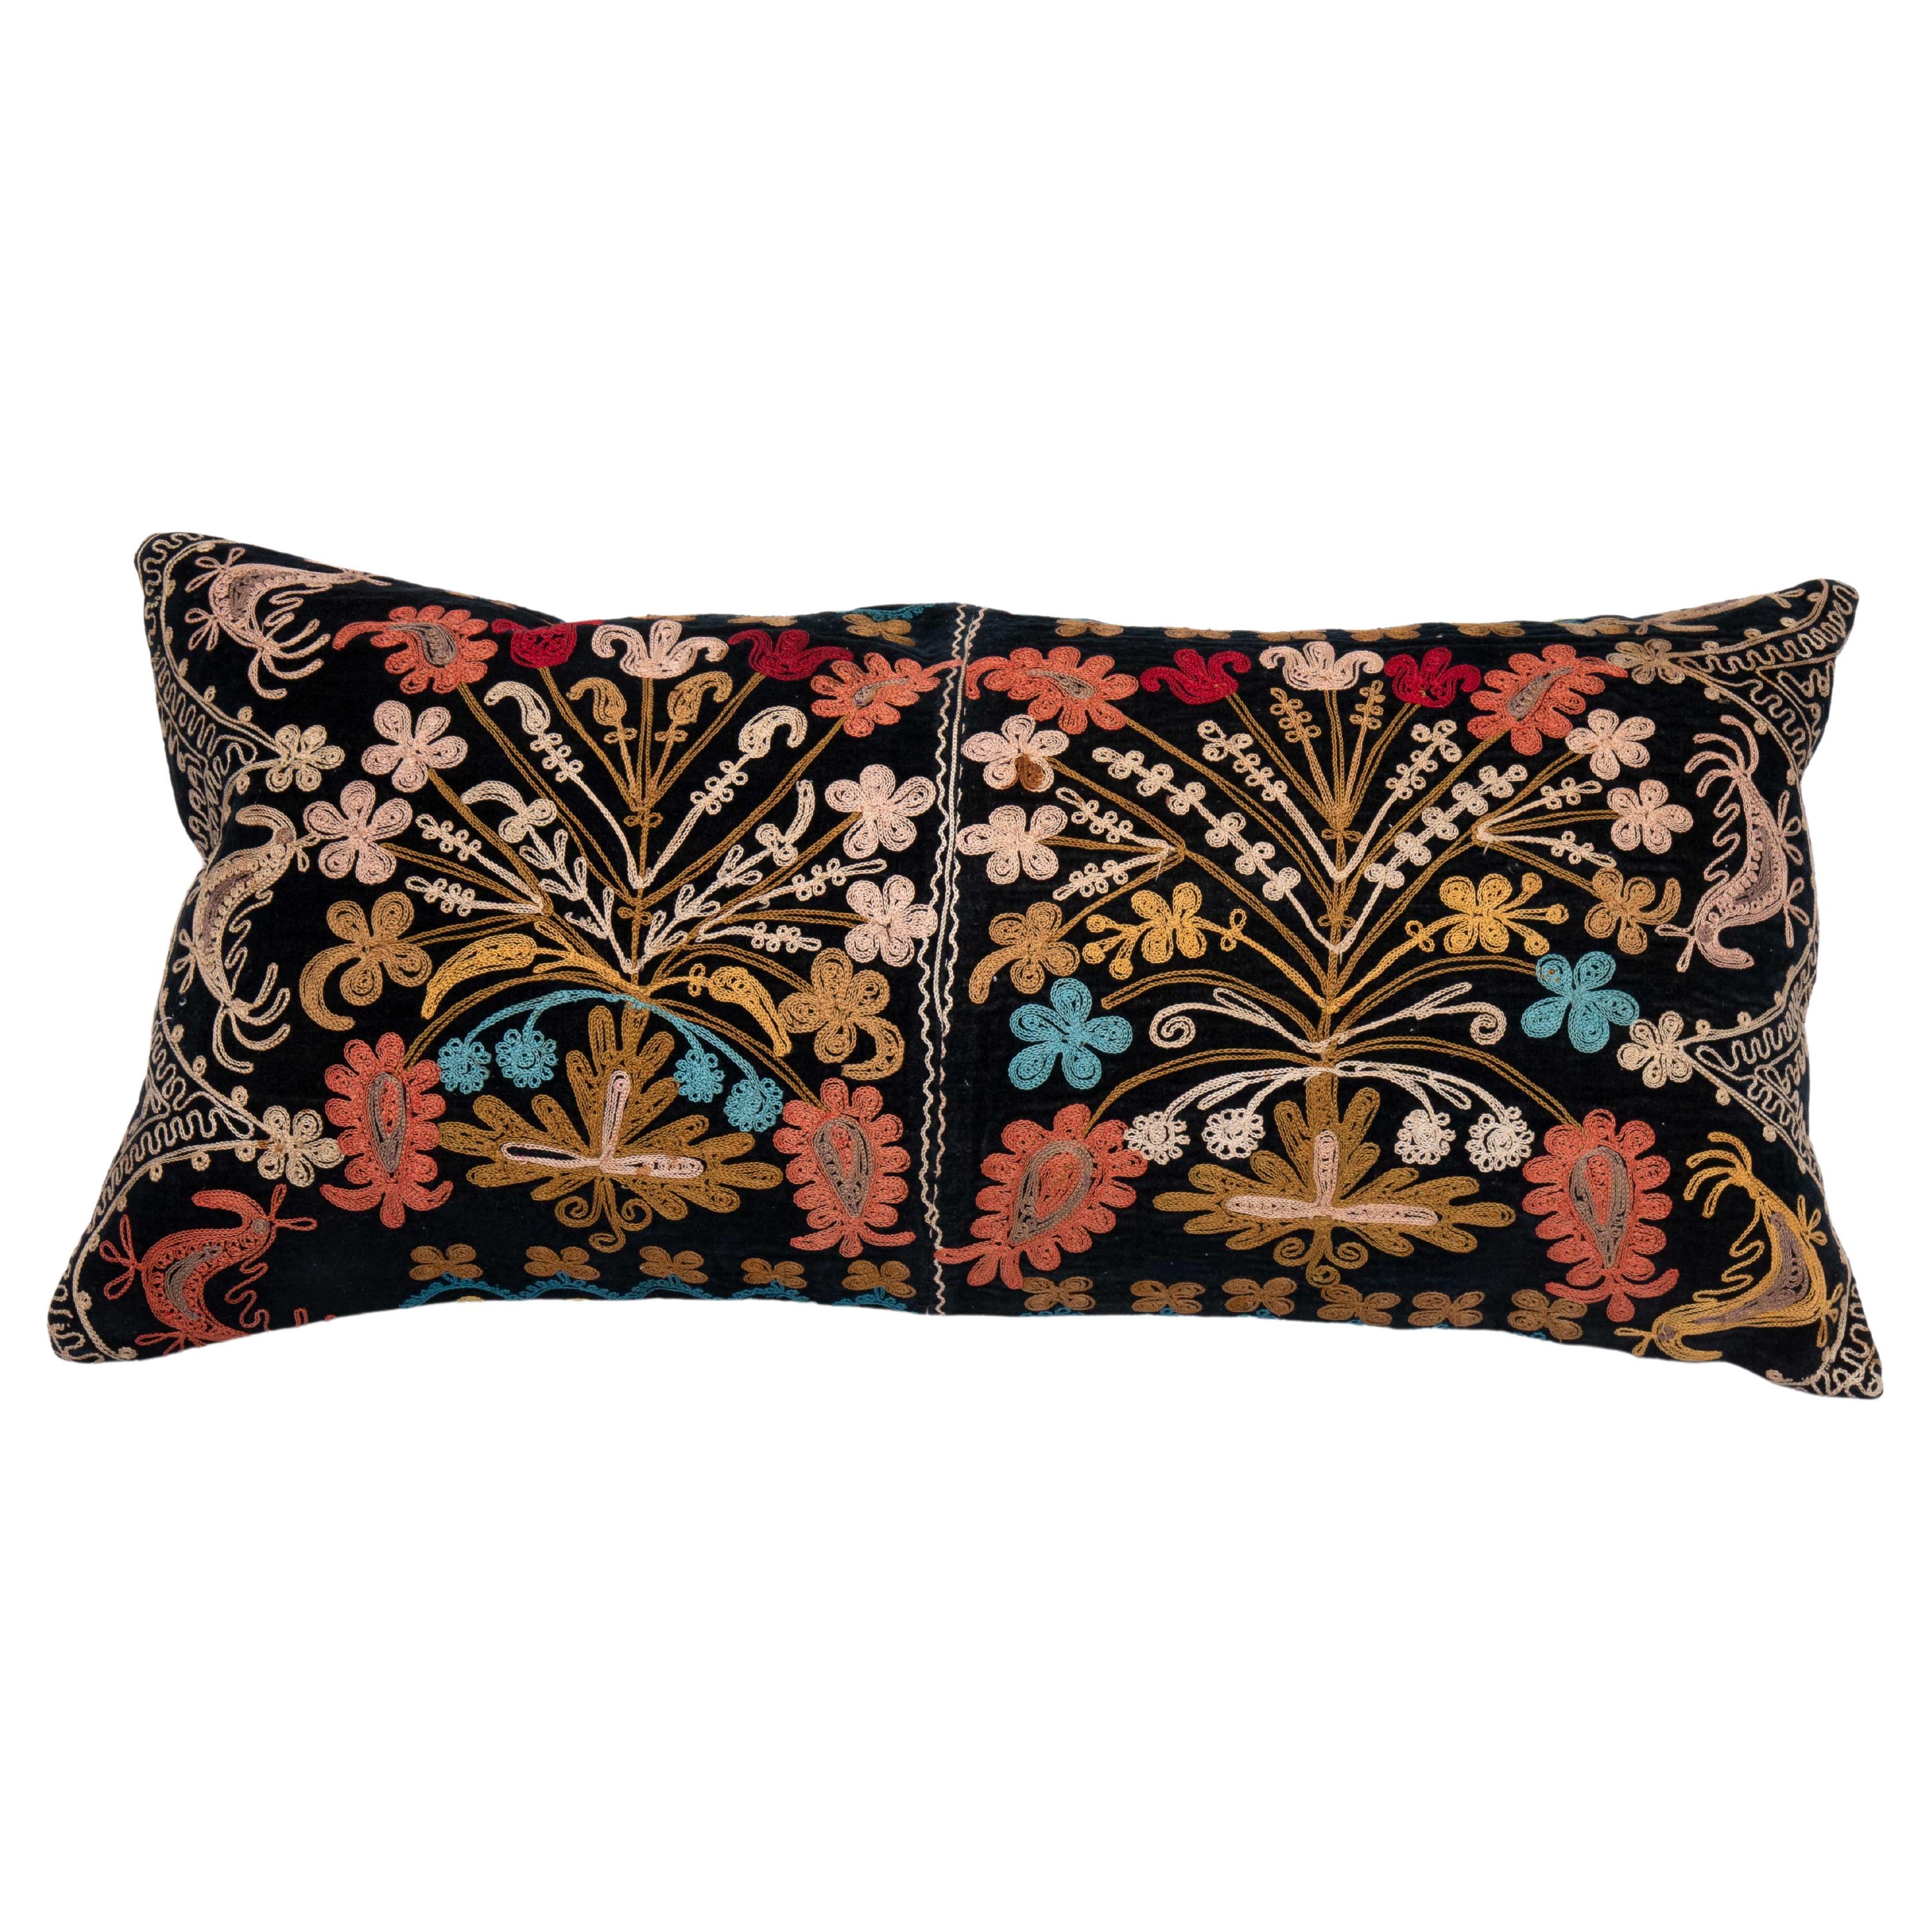 Suzani Pillow Cover Made from a Vintage Velvet Suzani For Sale